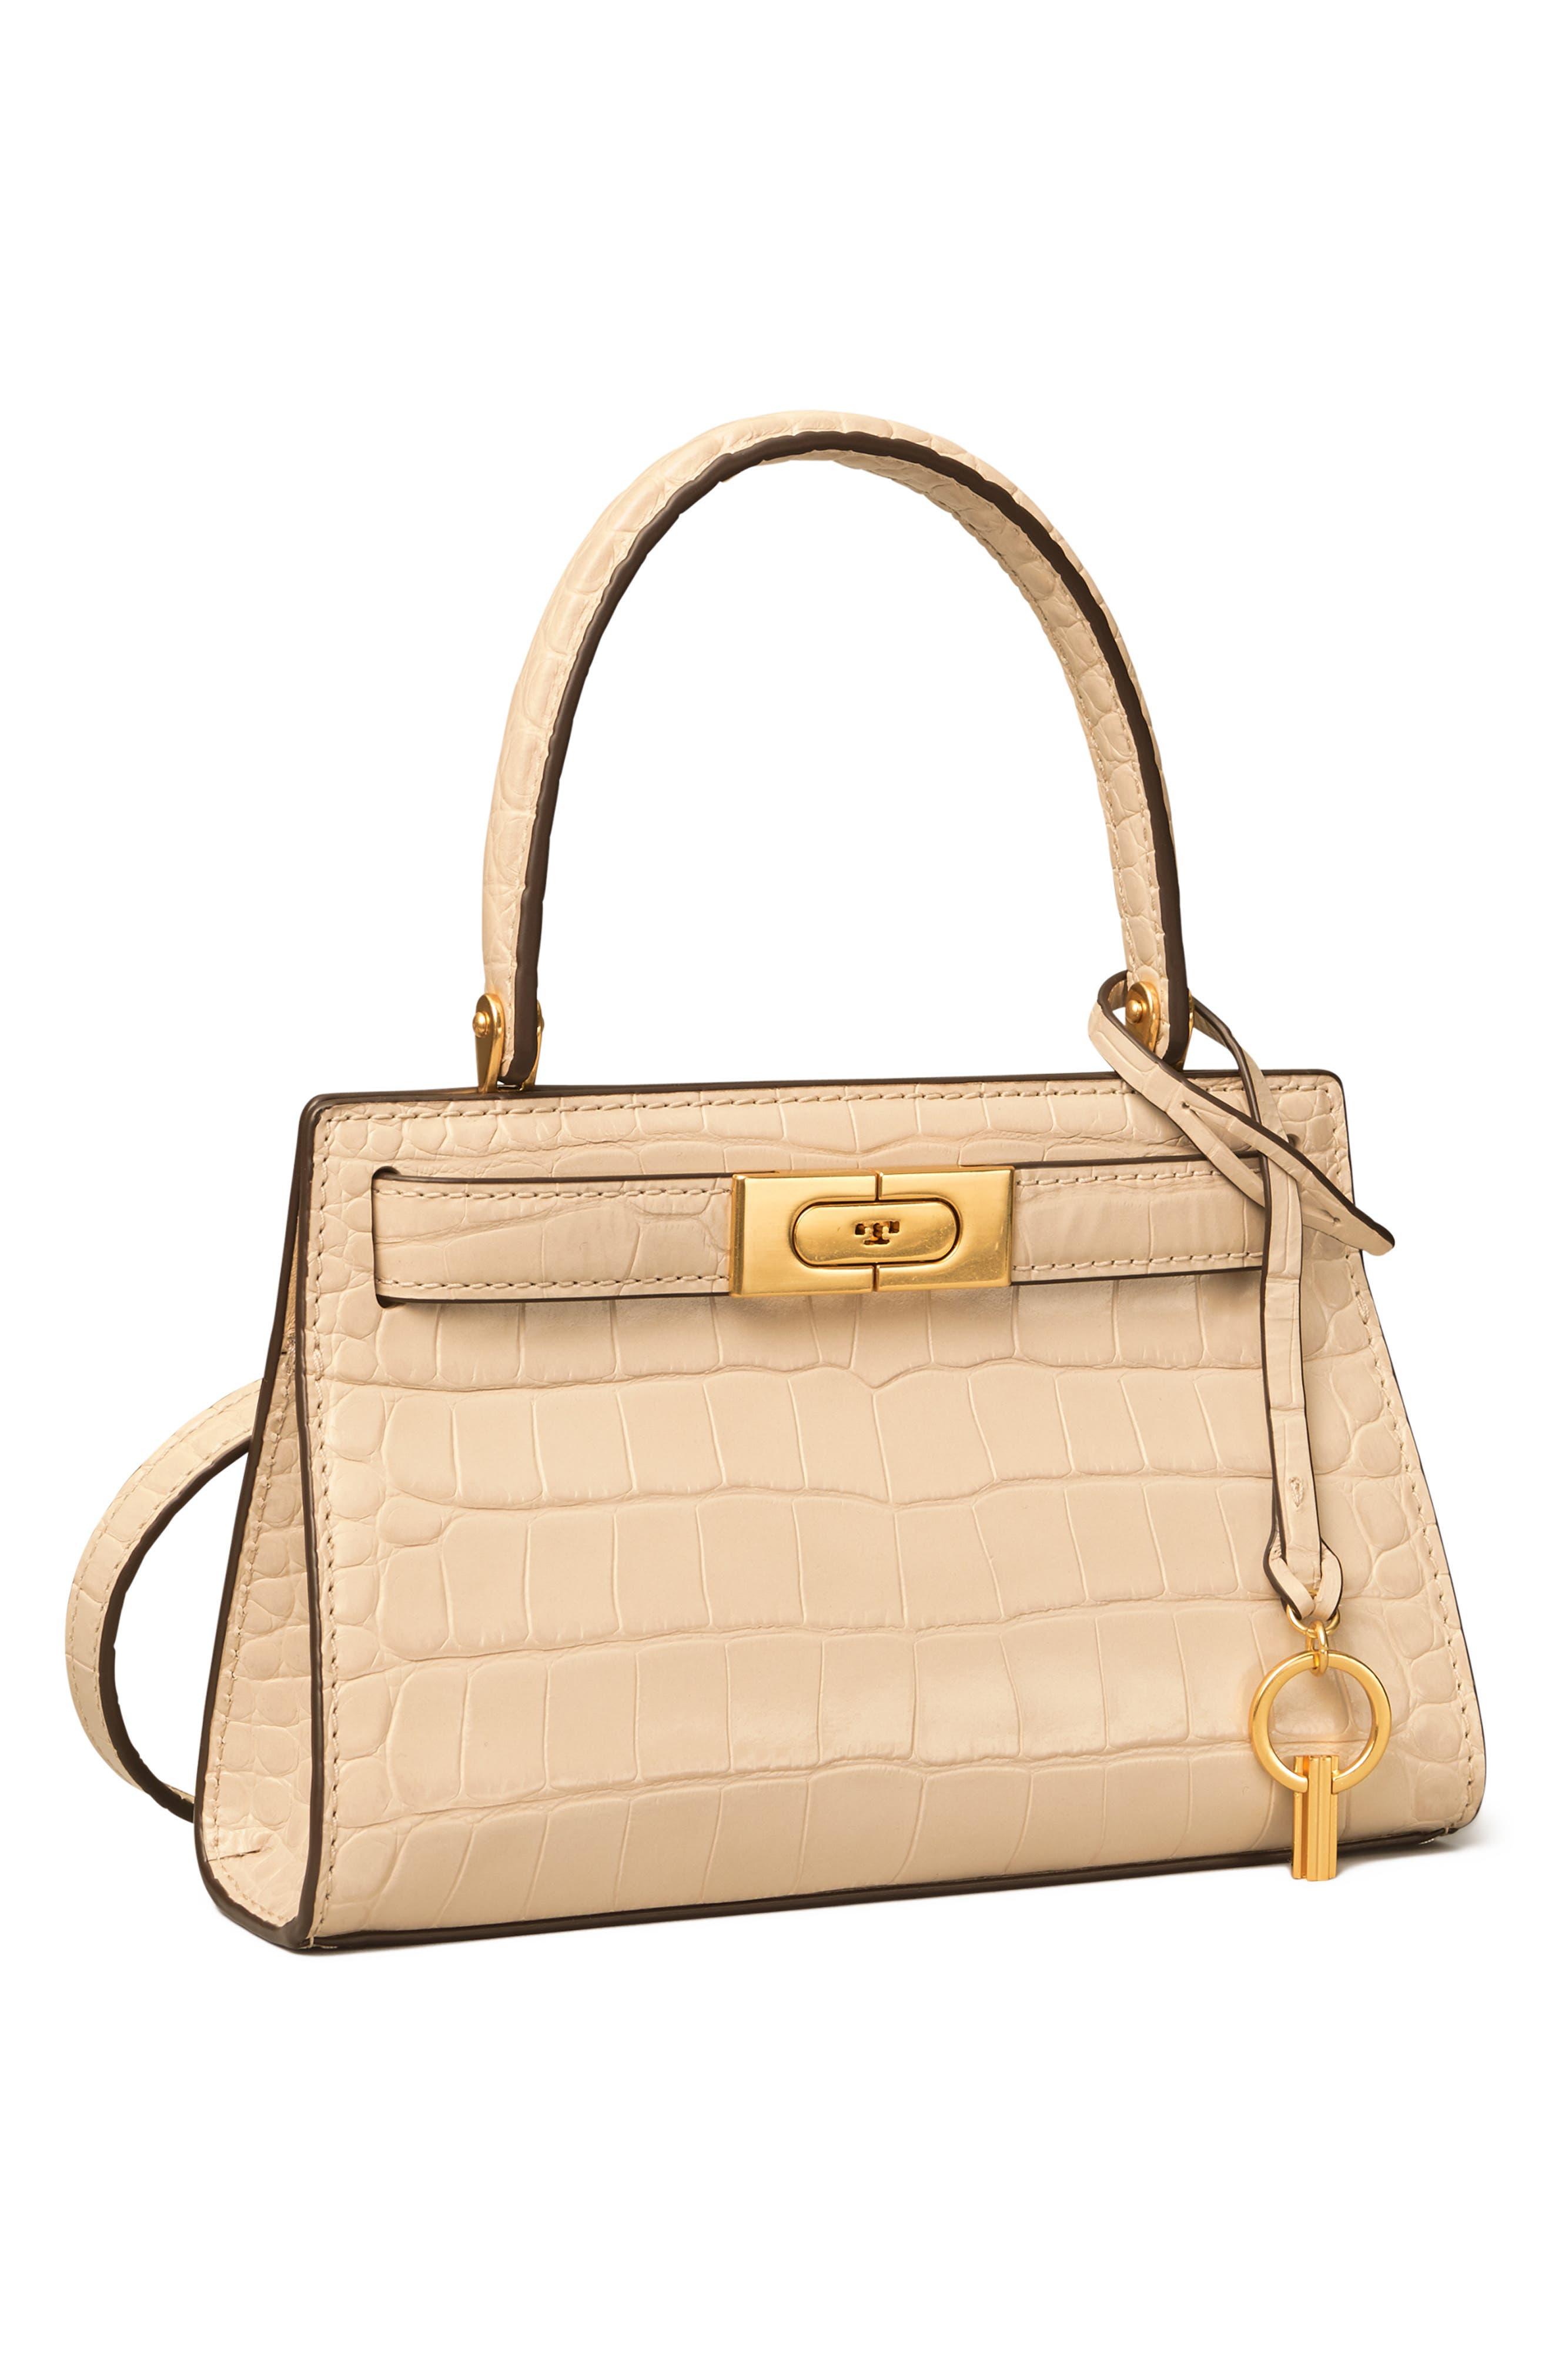 Tory Burch on X: Our Lee Radziwill Petite Bag in croc-embossed